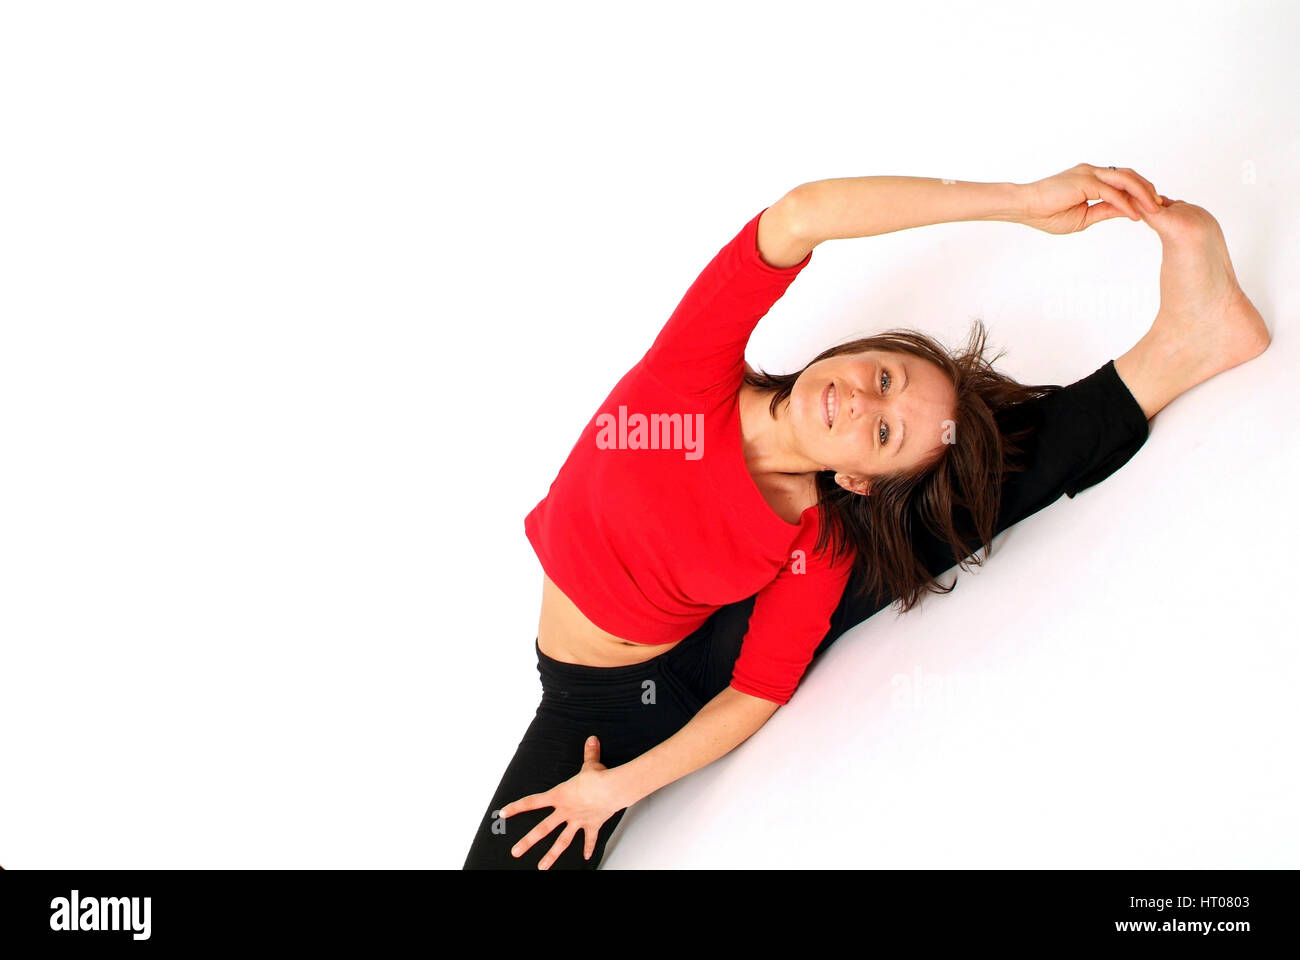 Junge Frau beim Dehnen - young woman does stretching Stock Photo